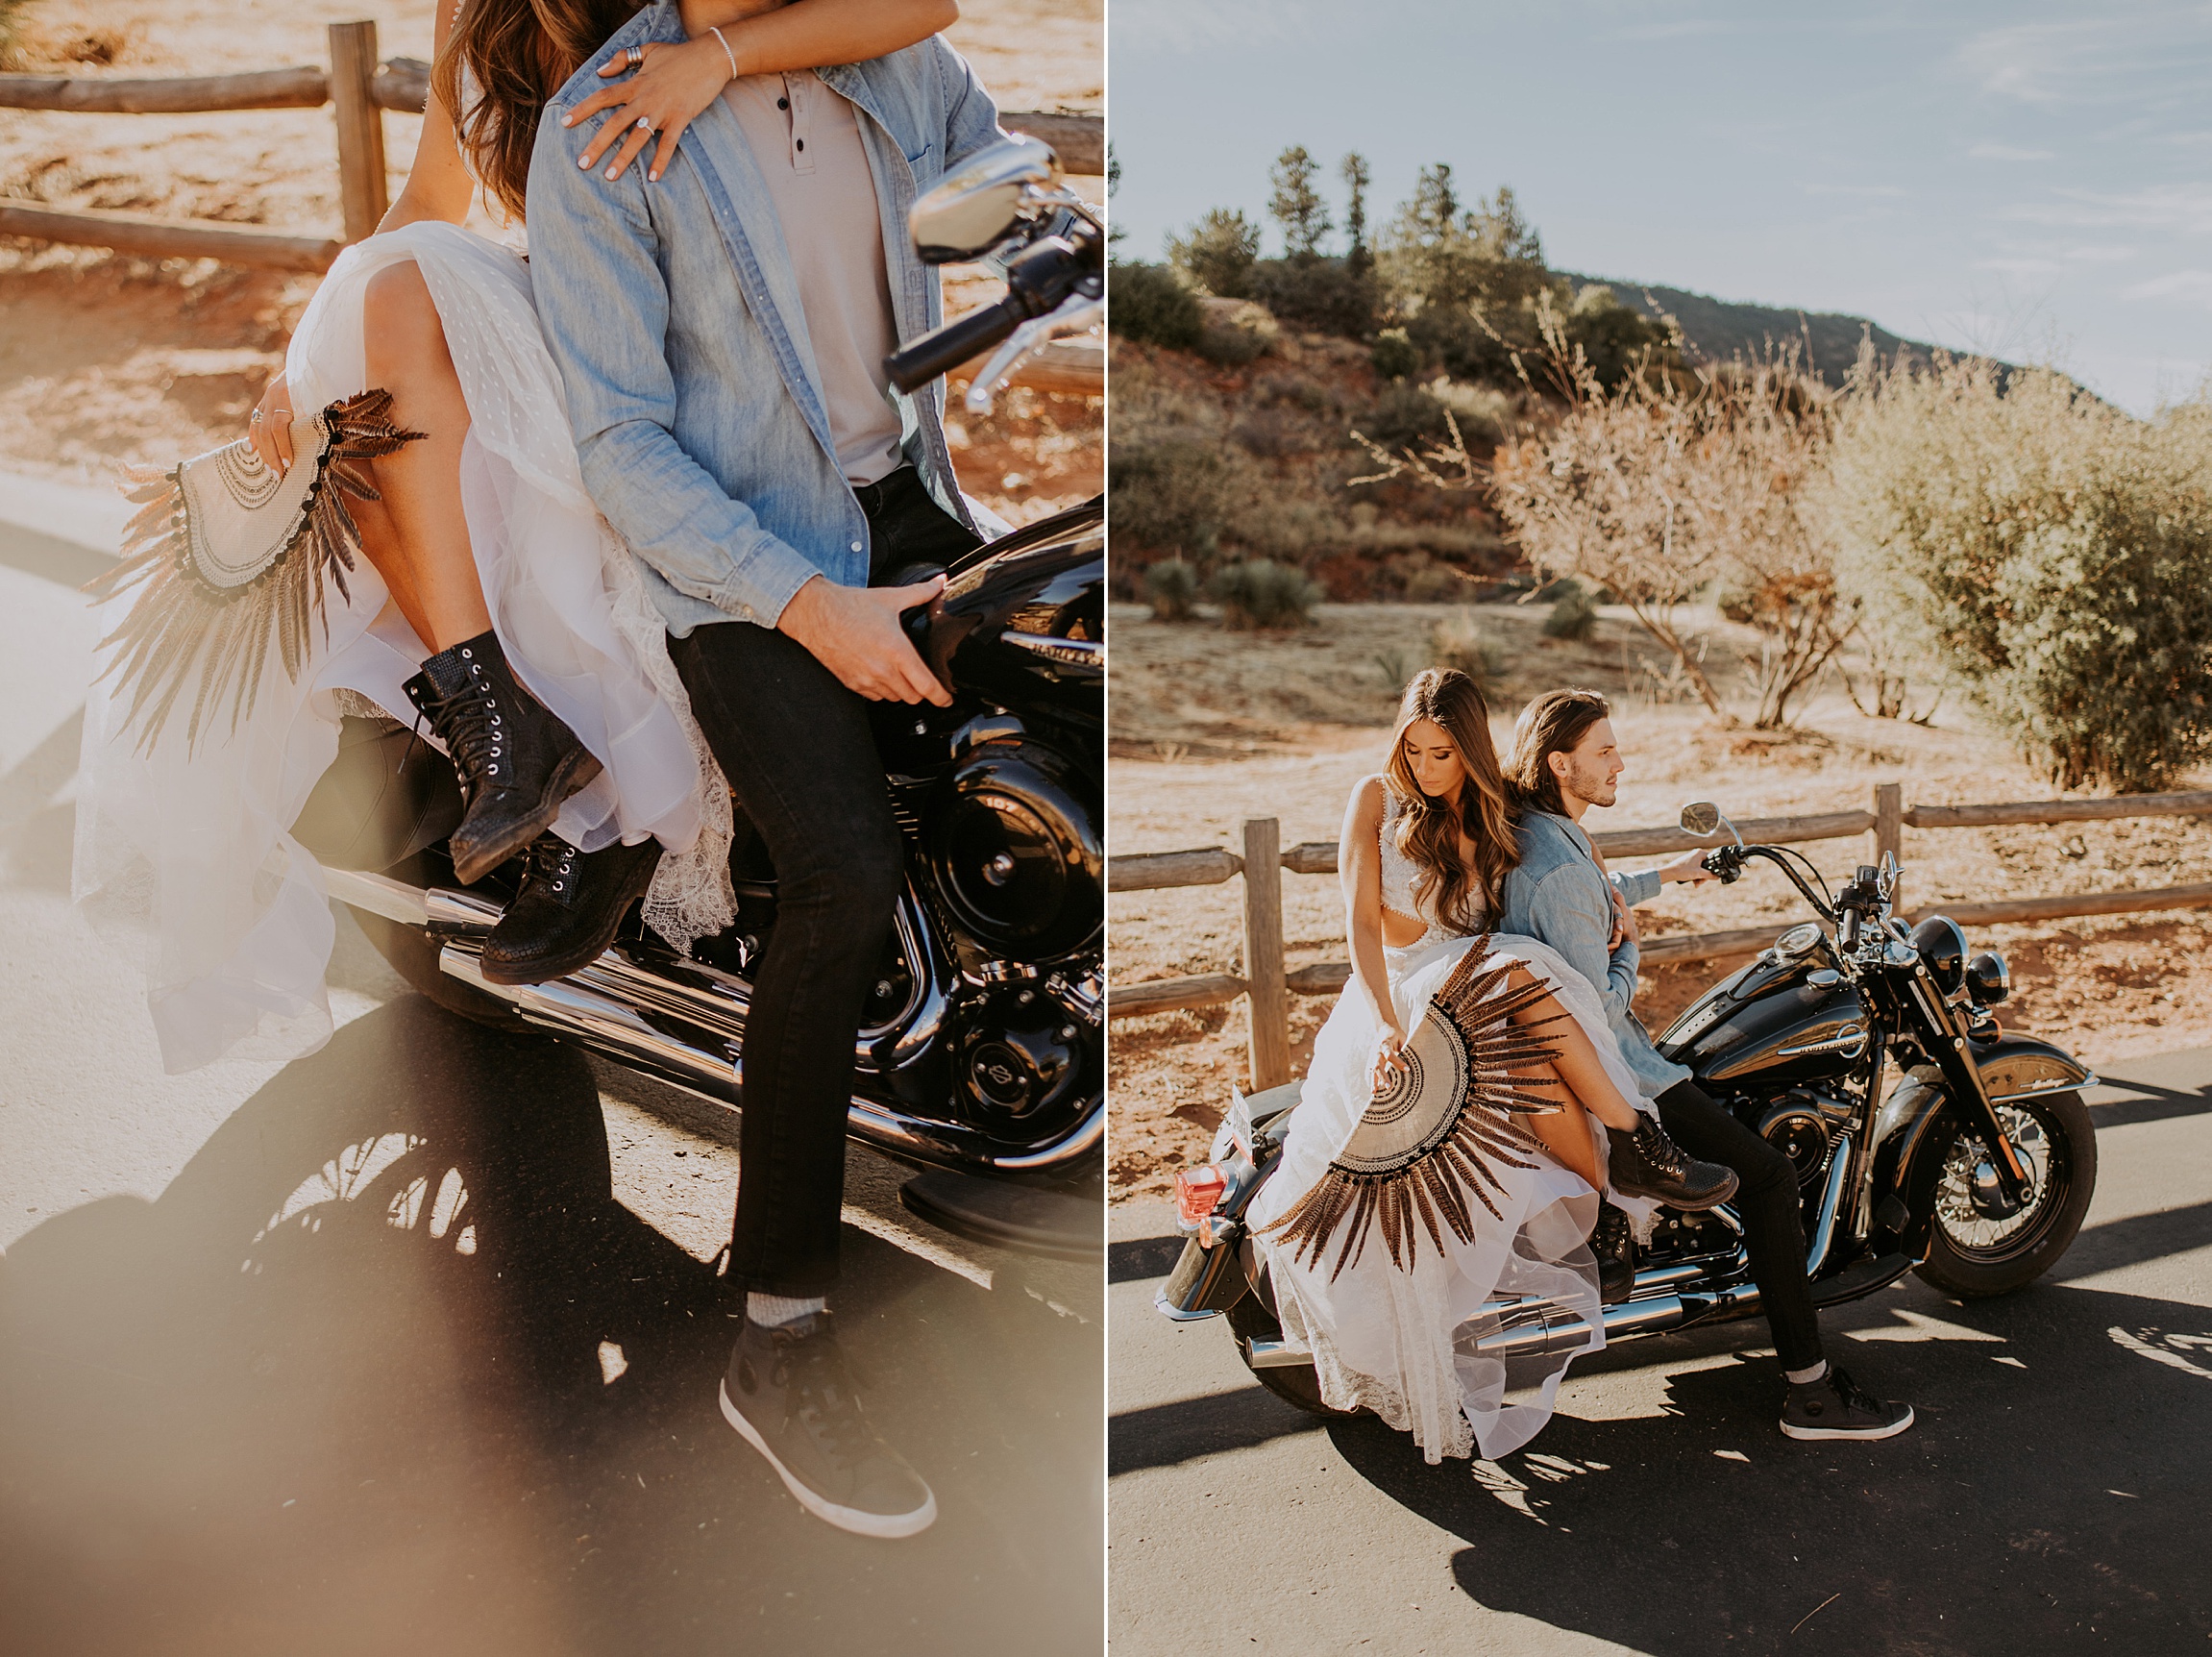 Engagement in Sedona AZ, Elopement in Sedona, Bride and Groom, Harley Davidson Motorcycle, Le Laurier Bridal, Adventurous Elopement, Arizona Wedding Photographer, Engaged, boho bride, combat boots, feather fan, Le Laurier bridal